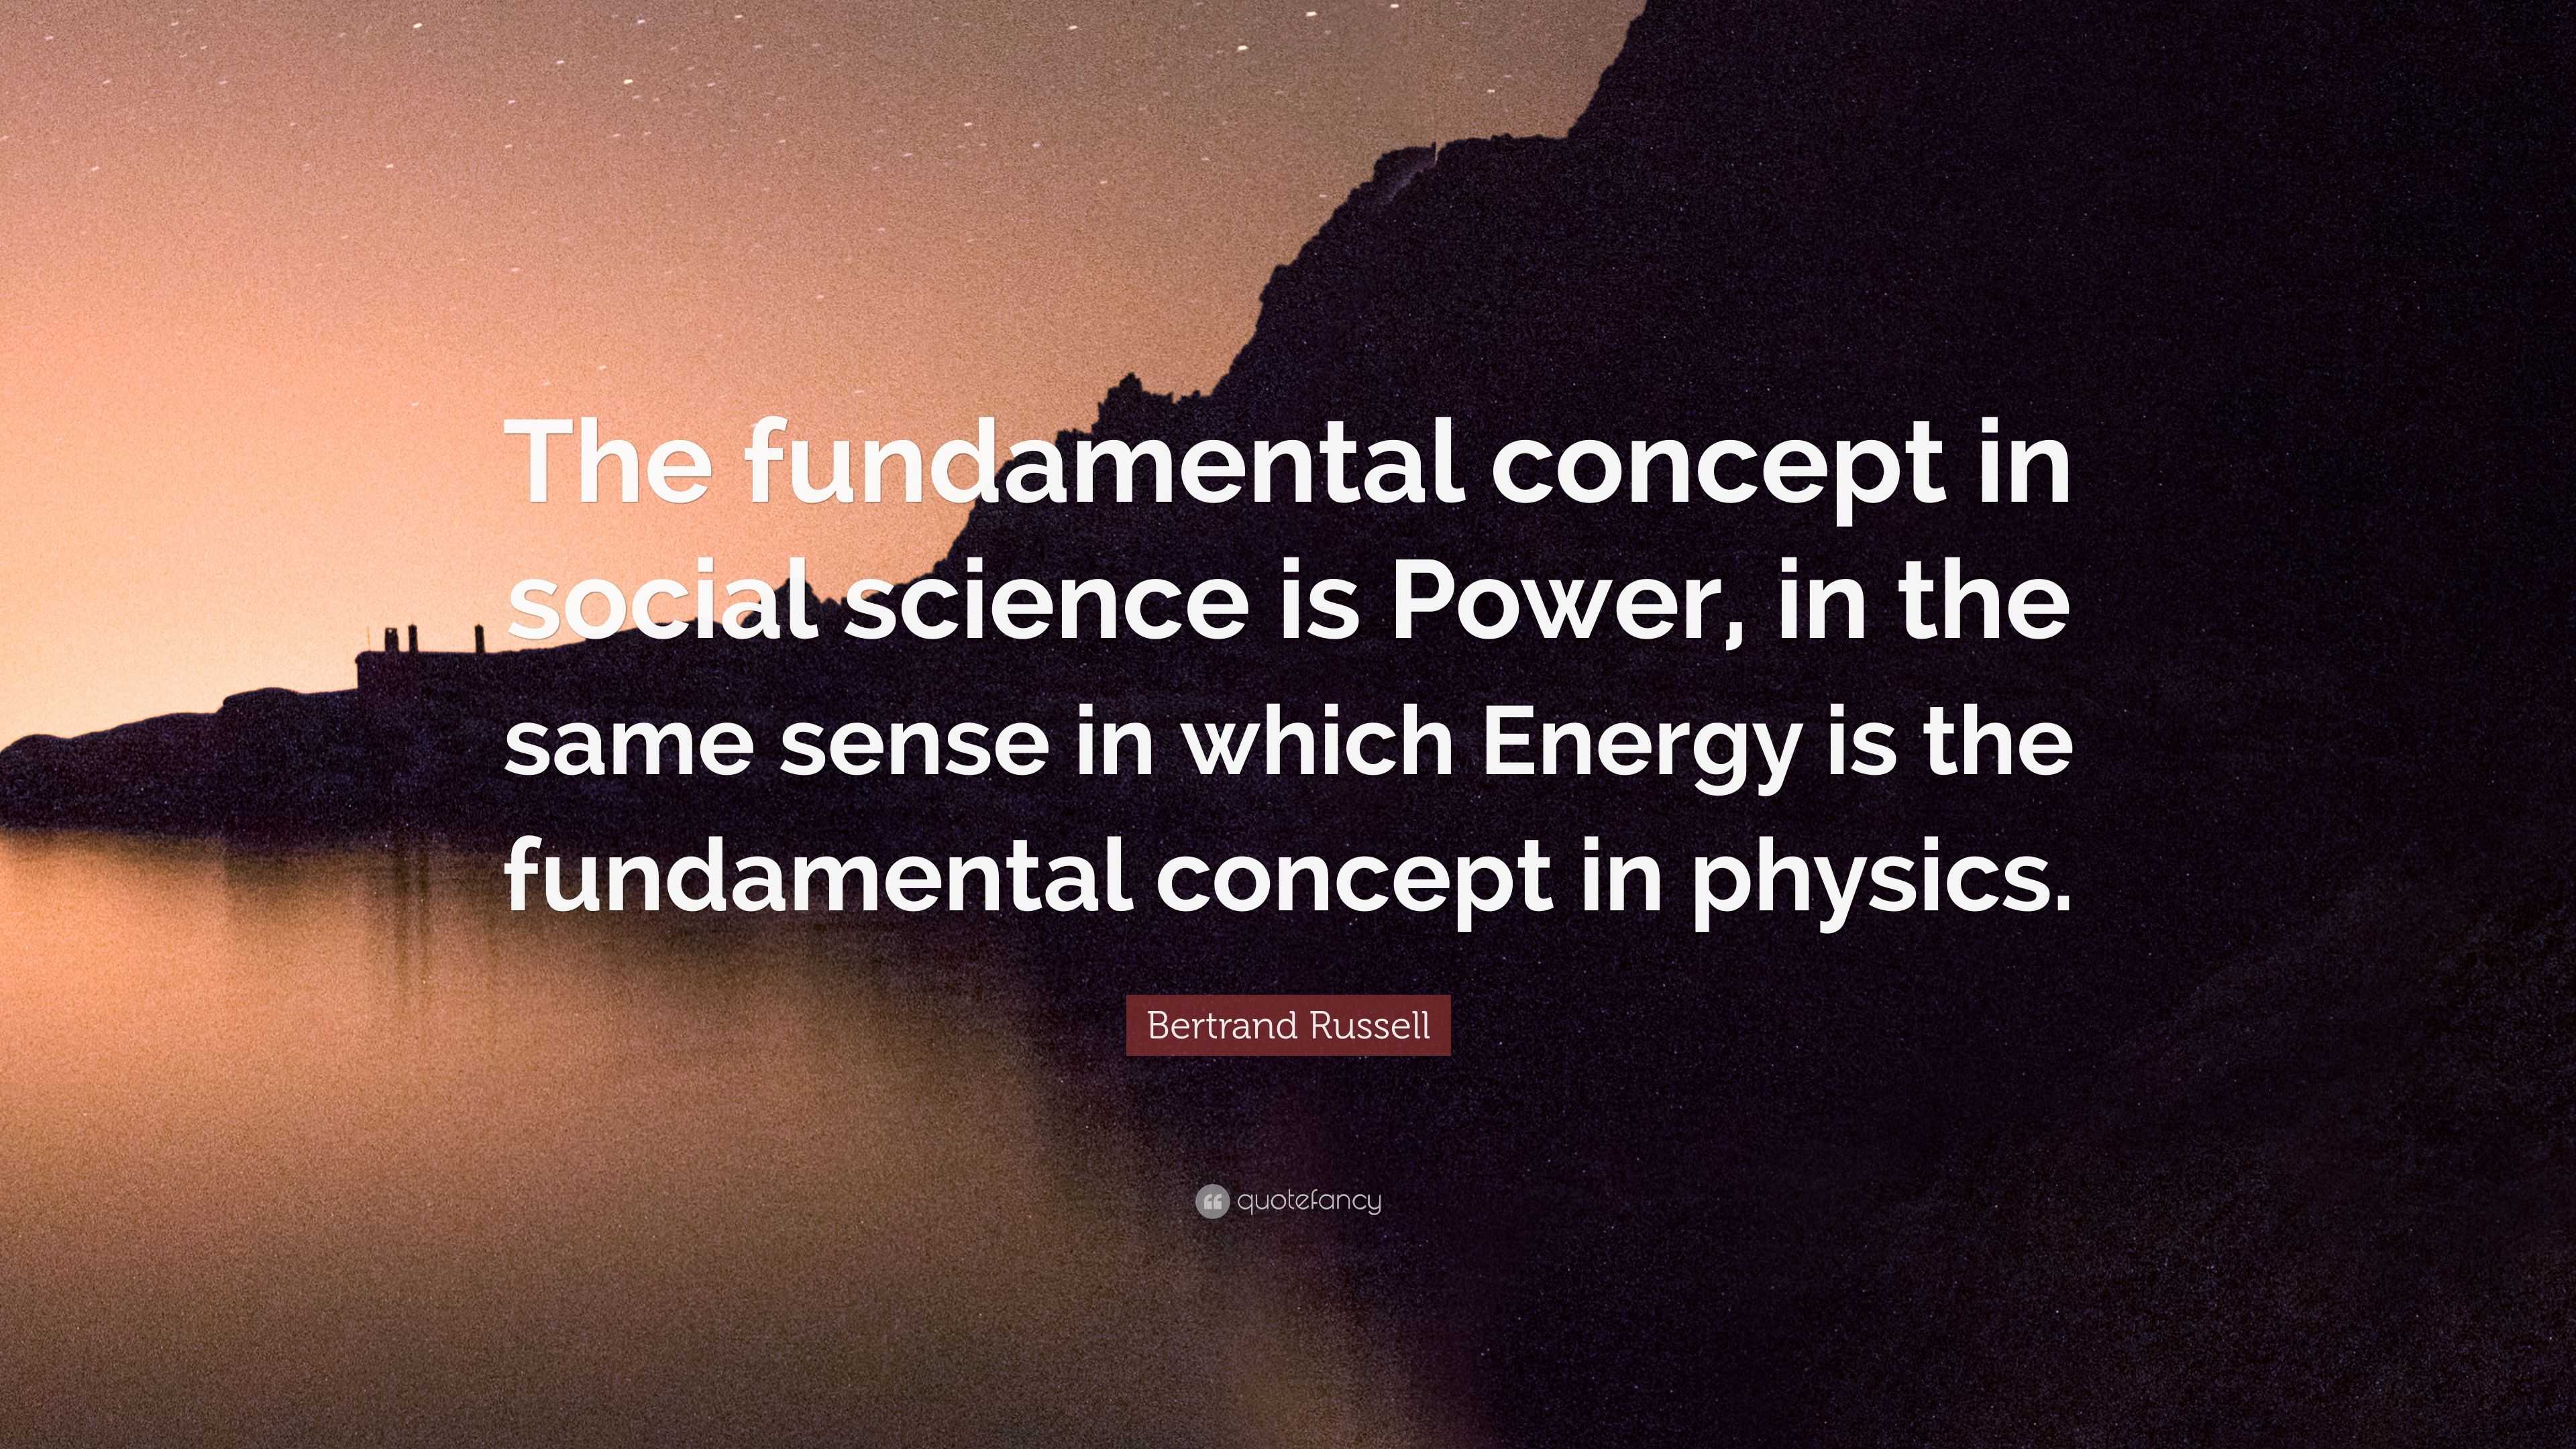 Bertrand Russell Quote: “The fundamental concept in social science is ... Energy Physics Quotes